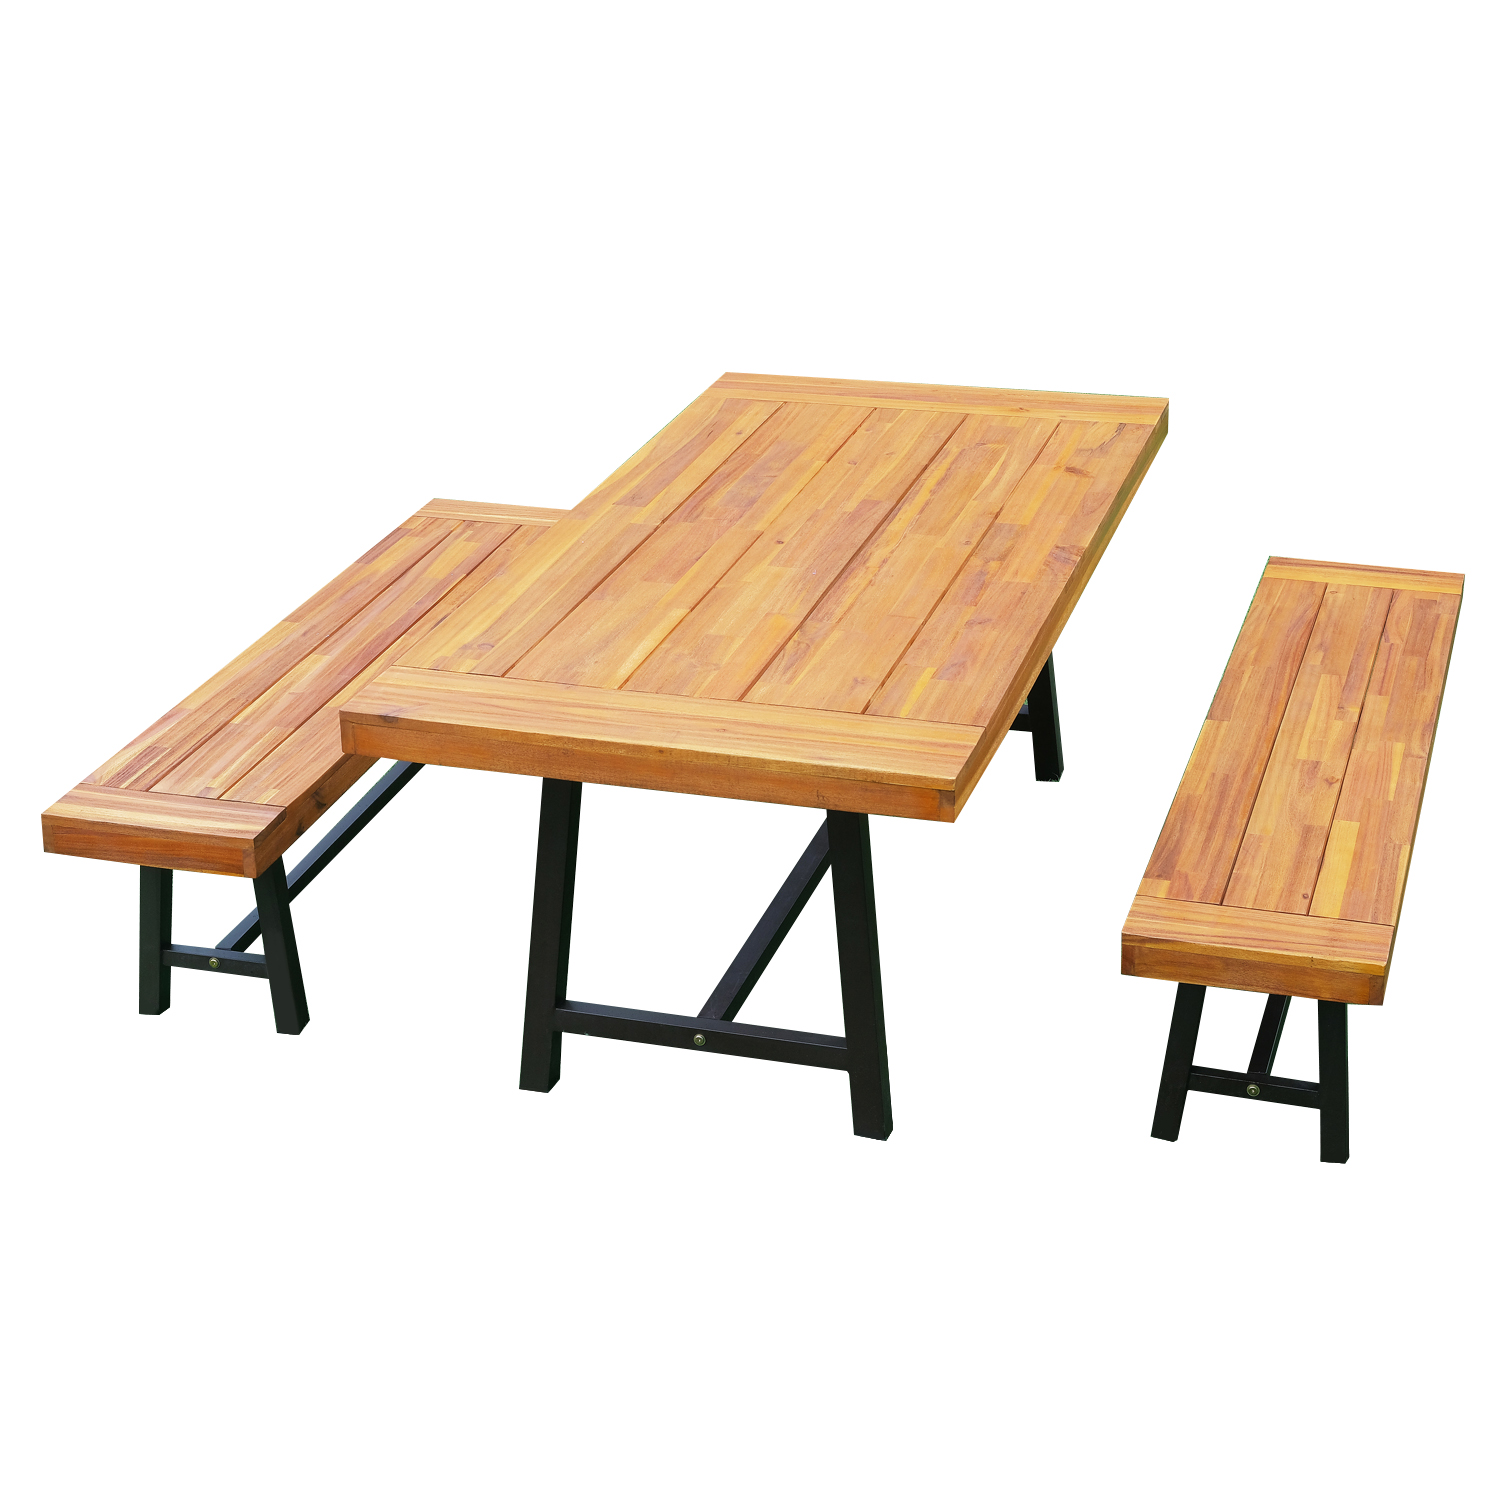 Outsunny 71'' Rustic Acacia Wood Outdoor Picnic Table and 63" Bench Seat Set - Natural Red Wood - image 1 of 6